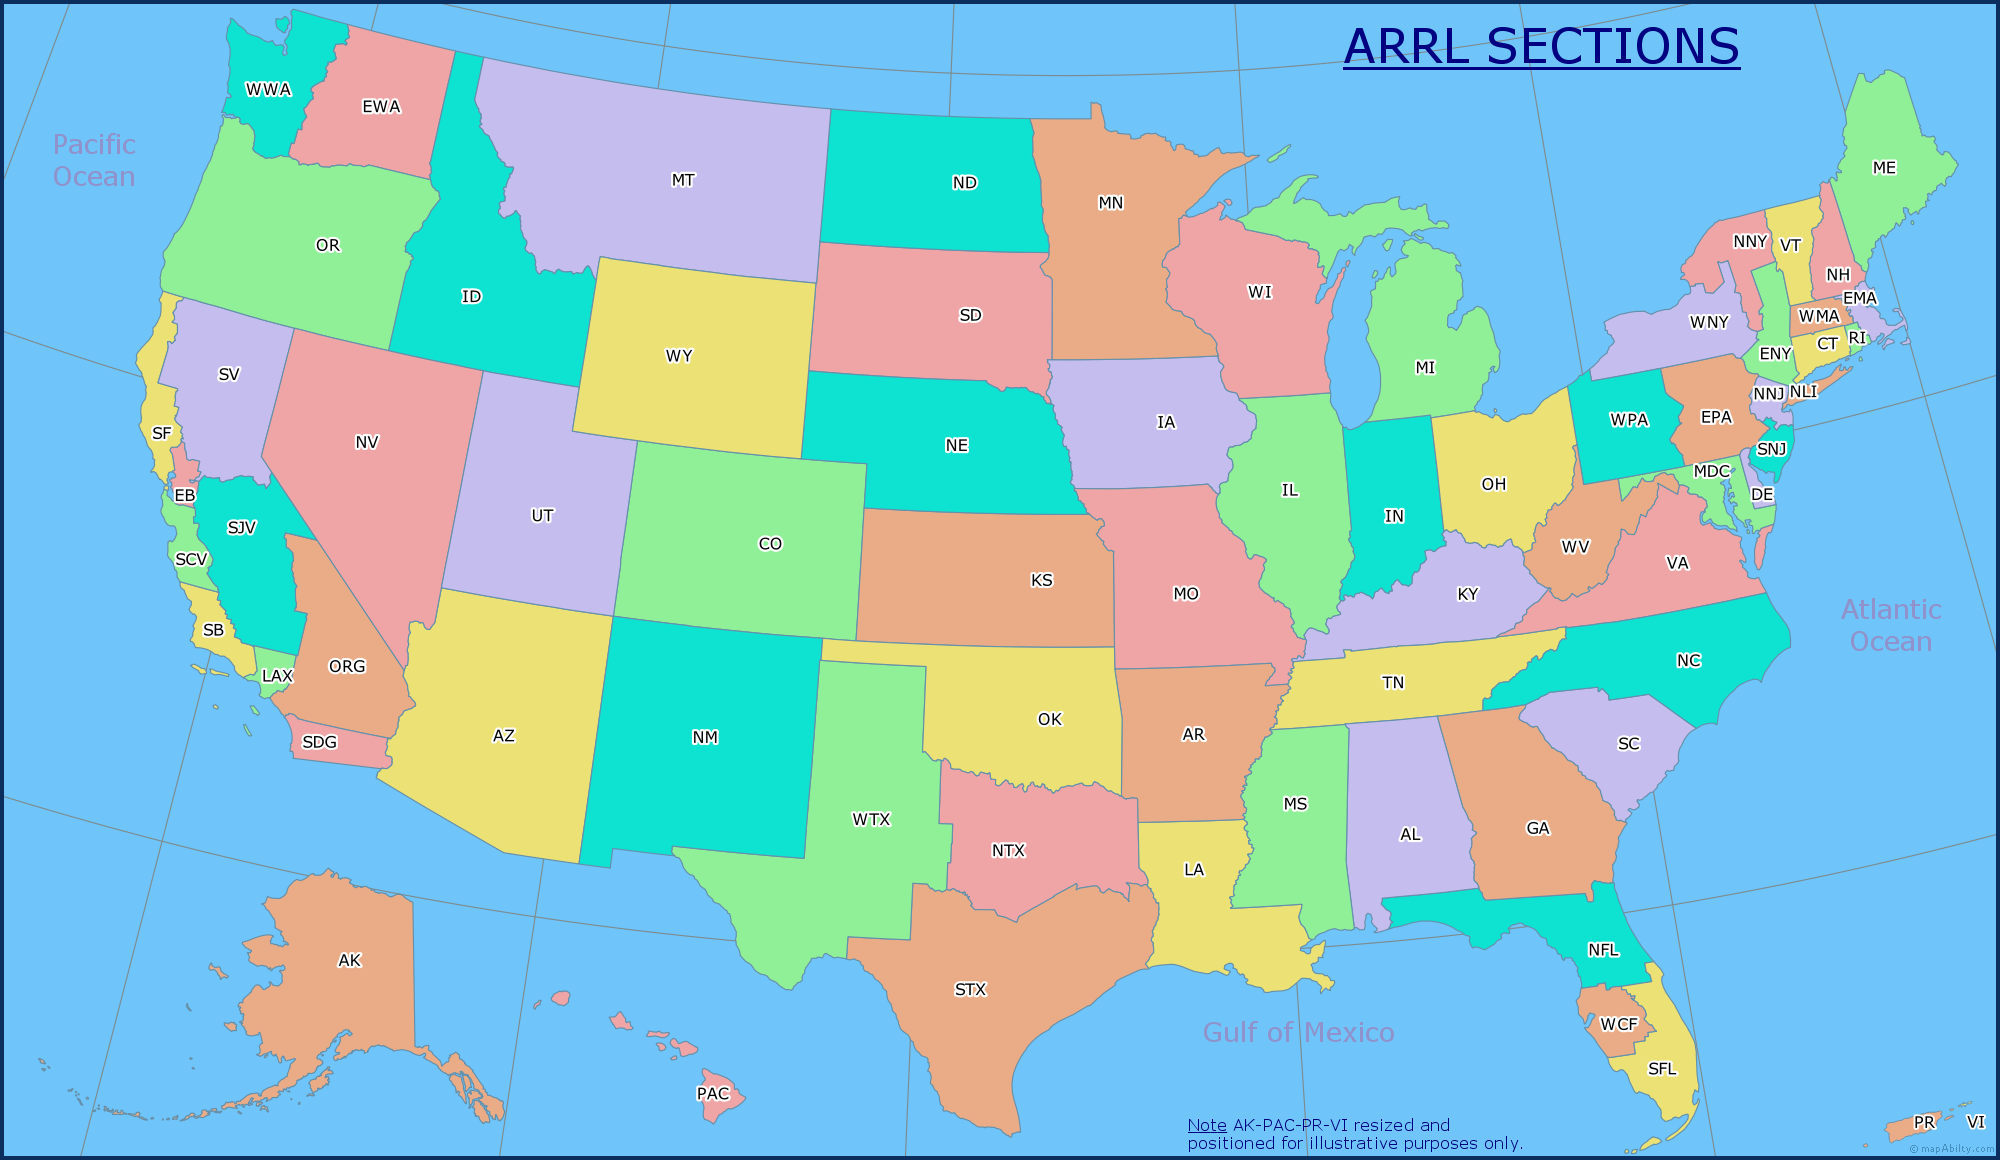 ARRL Sections Map for Sweepstake Contesters